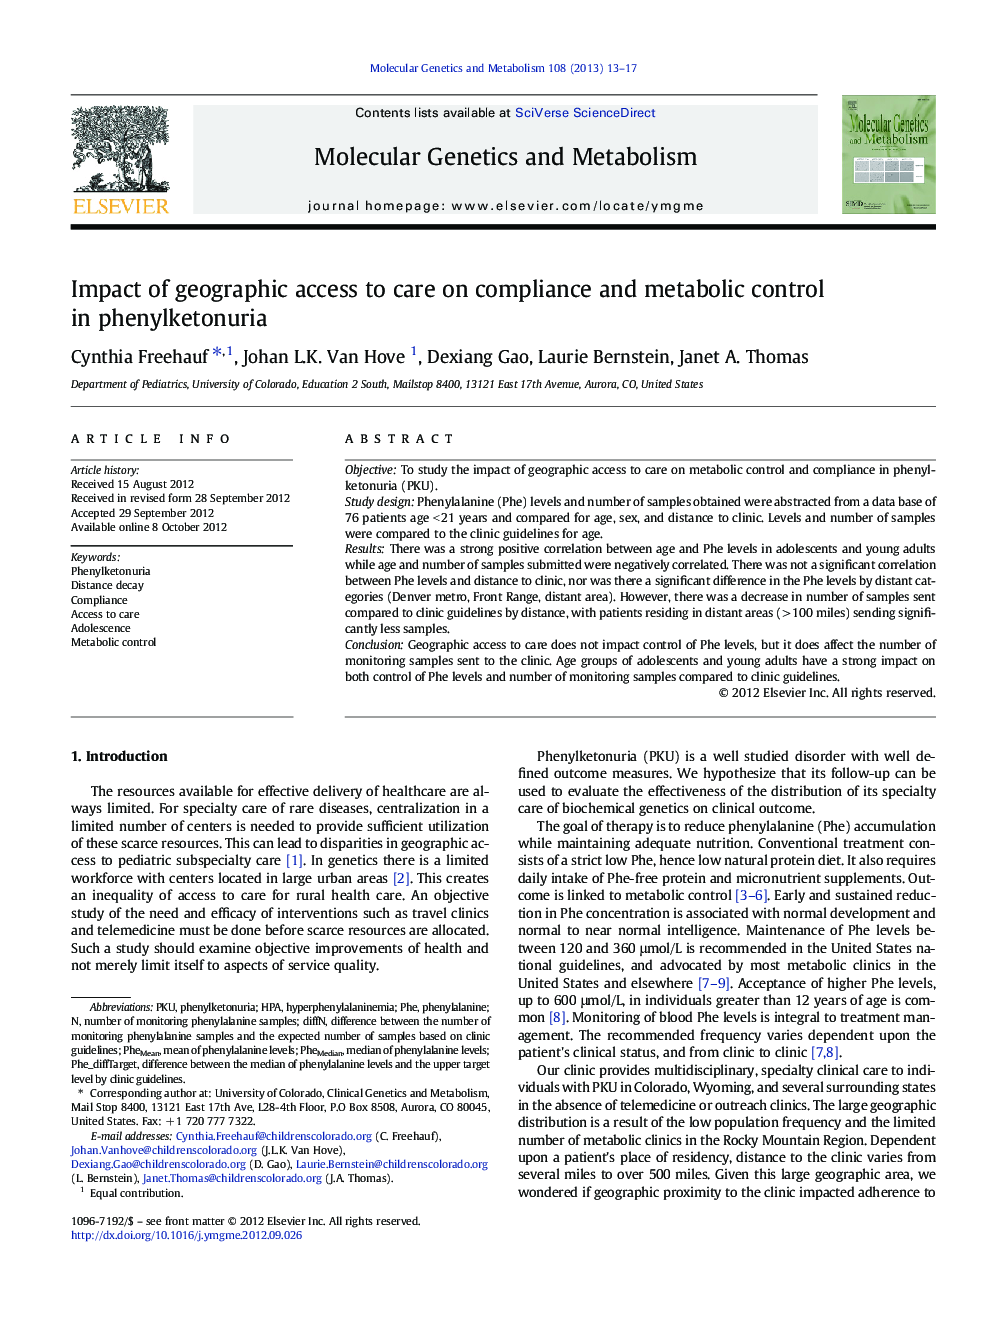 Impact of geographic access to care on compliance and metabolic control in phenylketonuria